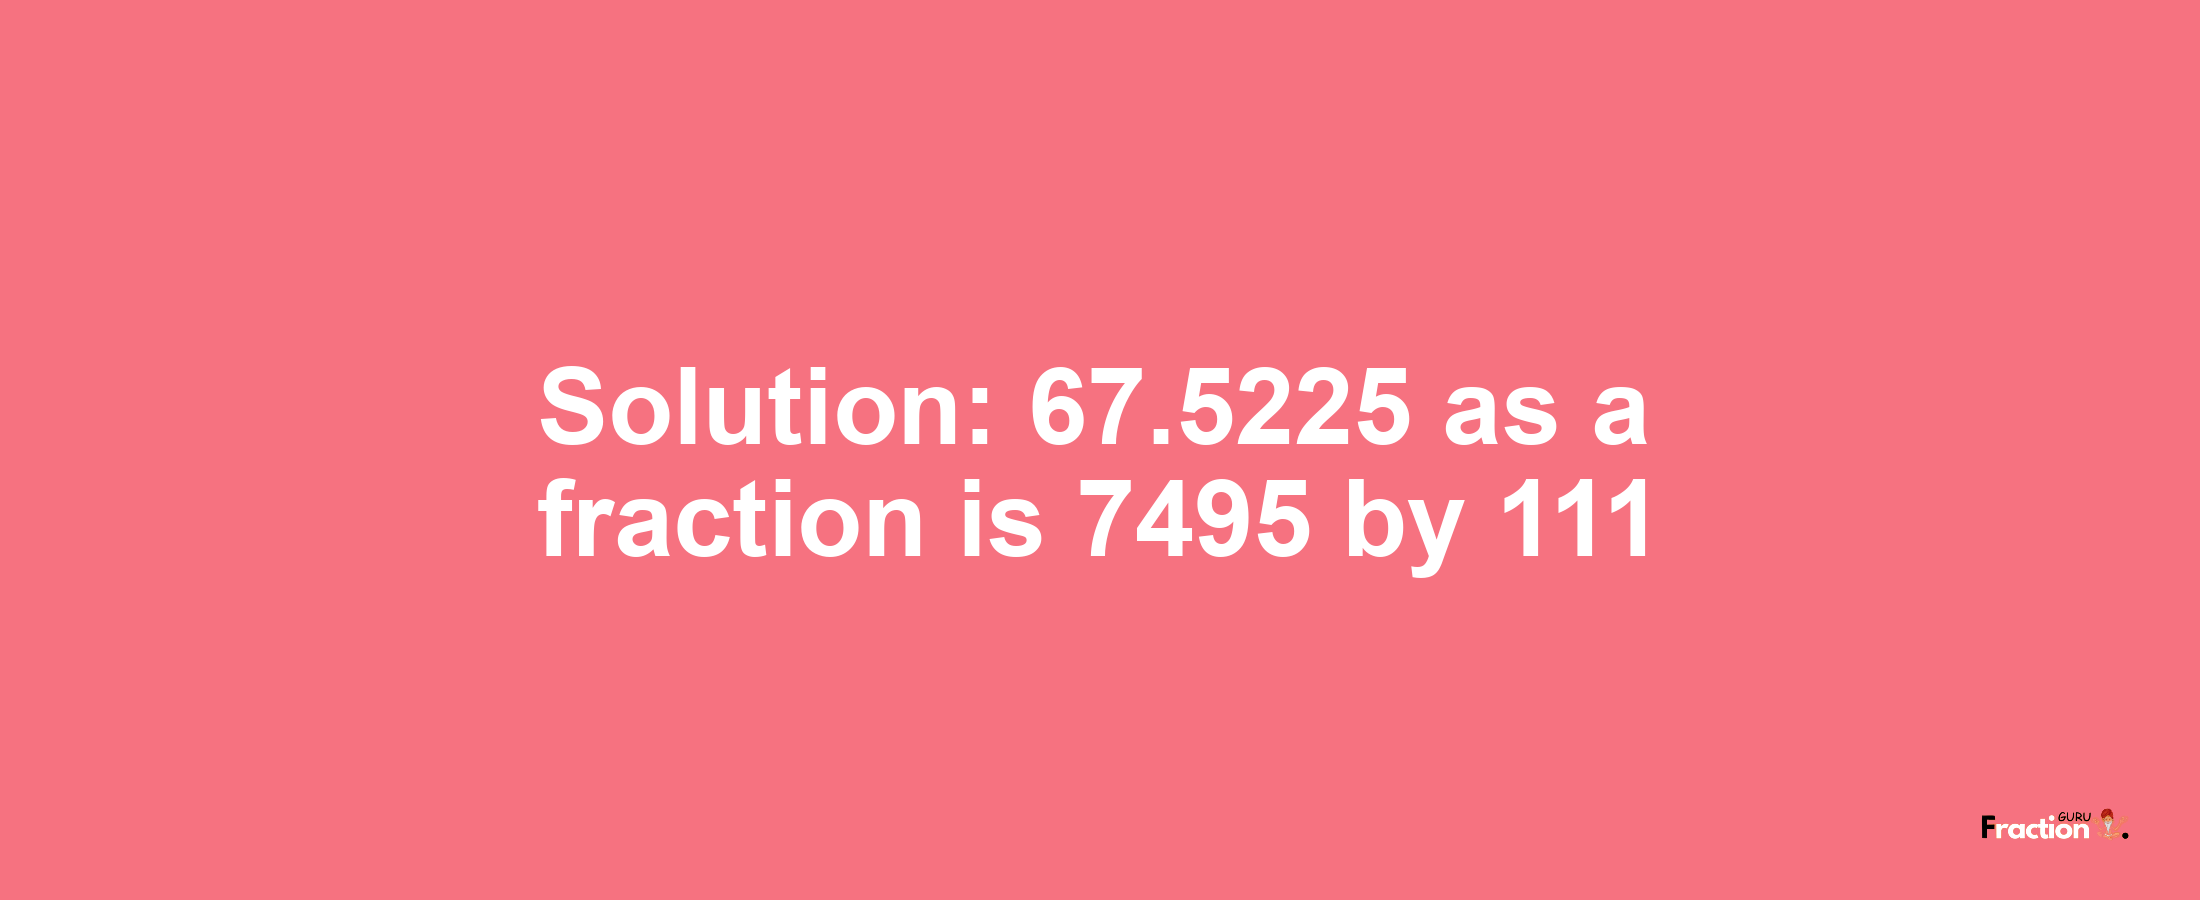 Solution:67.5225 as a fraction is 7495/111